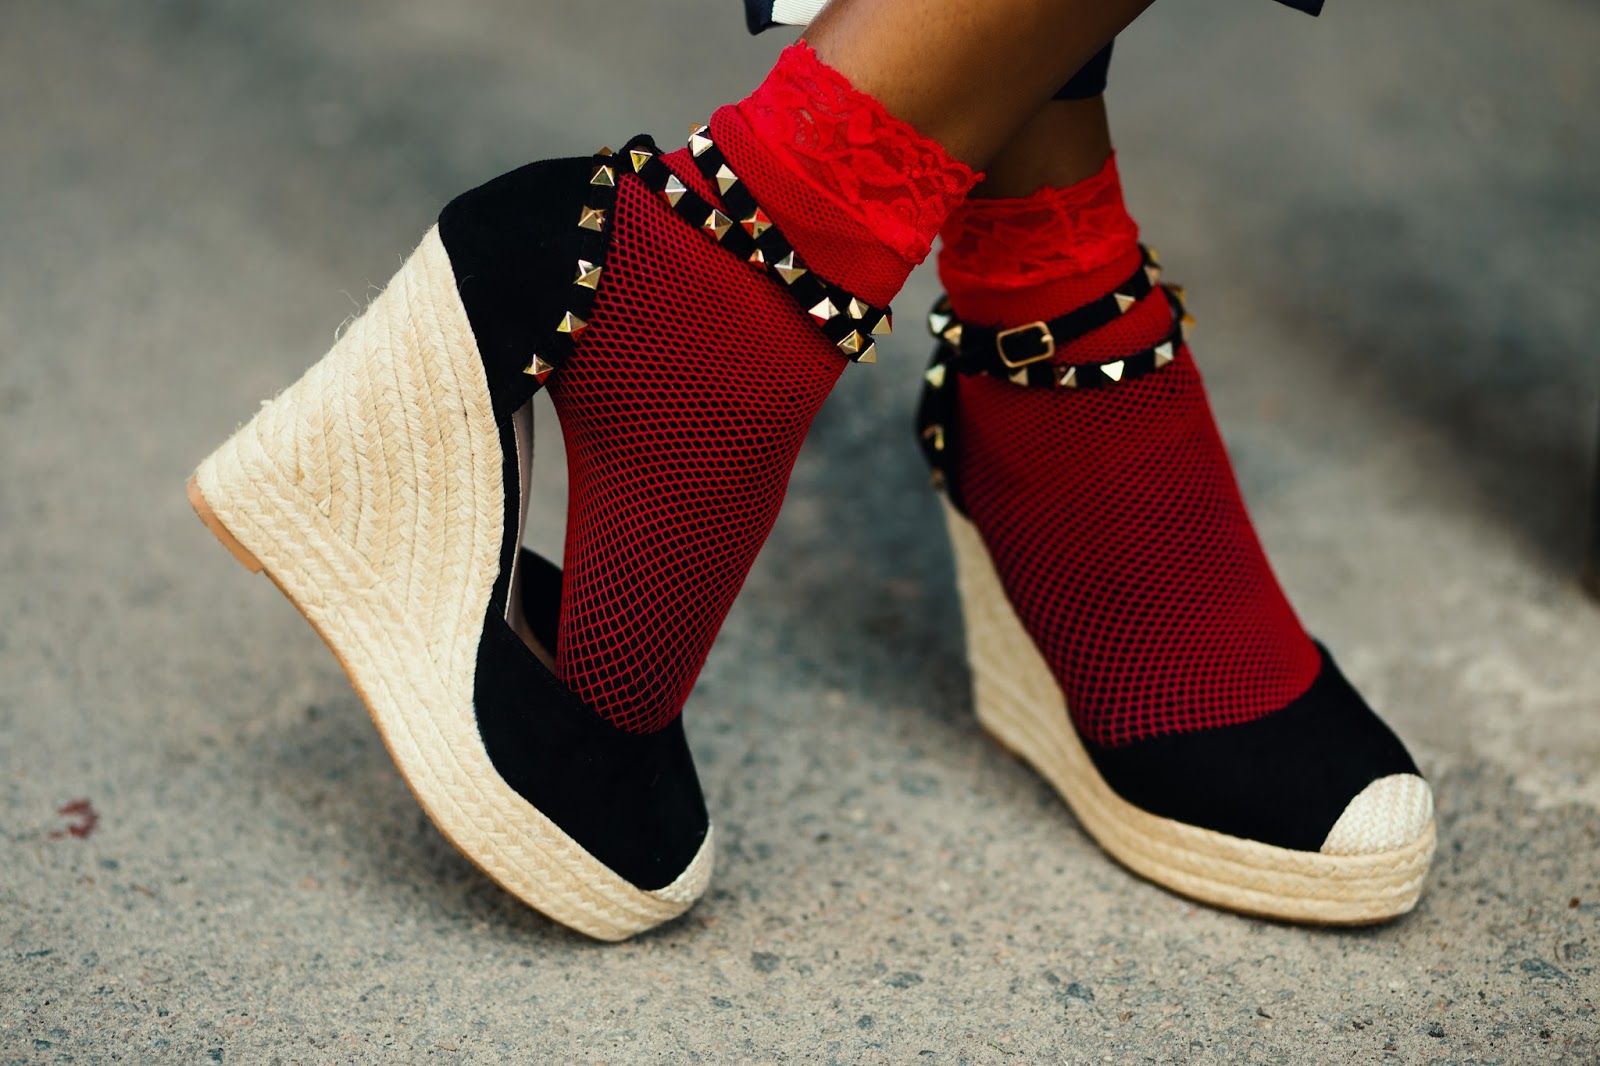 Black Wedge Espadrille With Studs | Melody Jacob